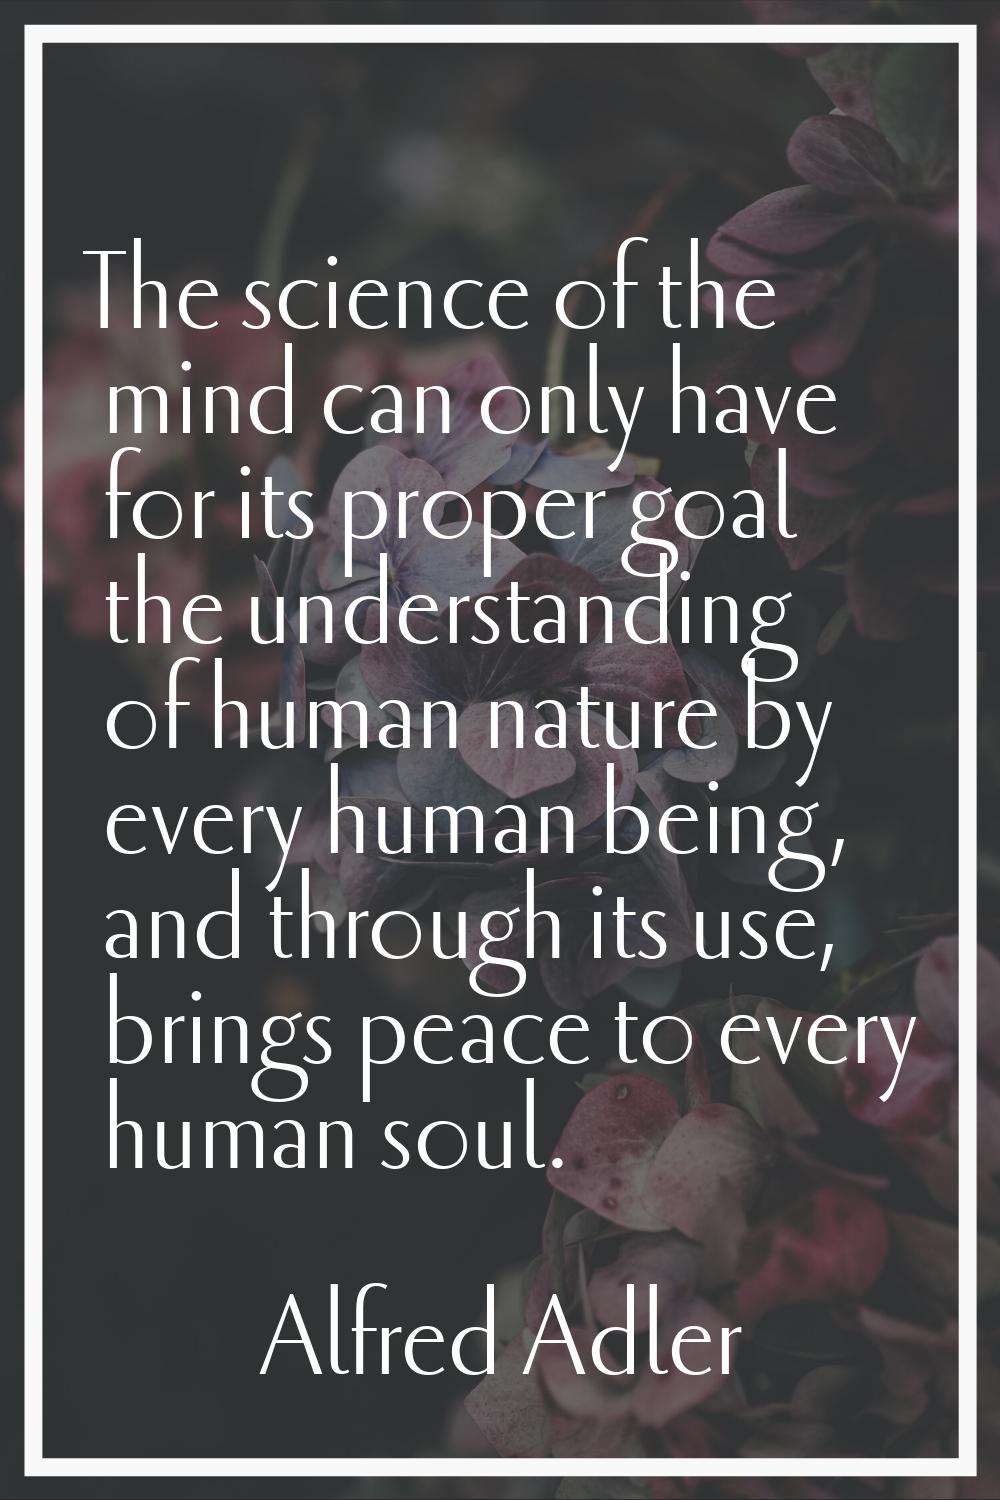 The science of the mind can only have for its proper goal the understanding of human nature by ever